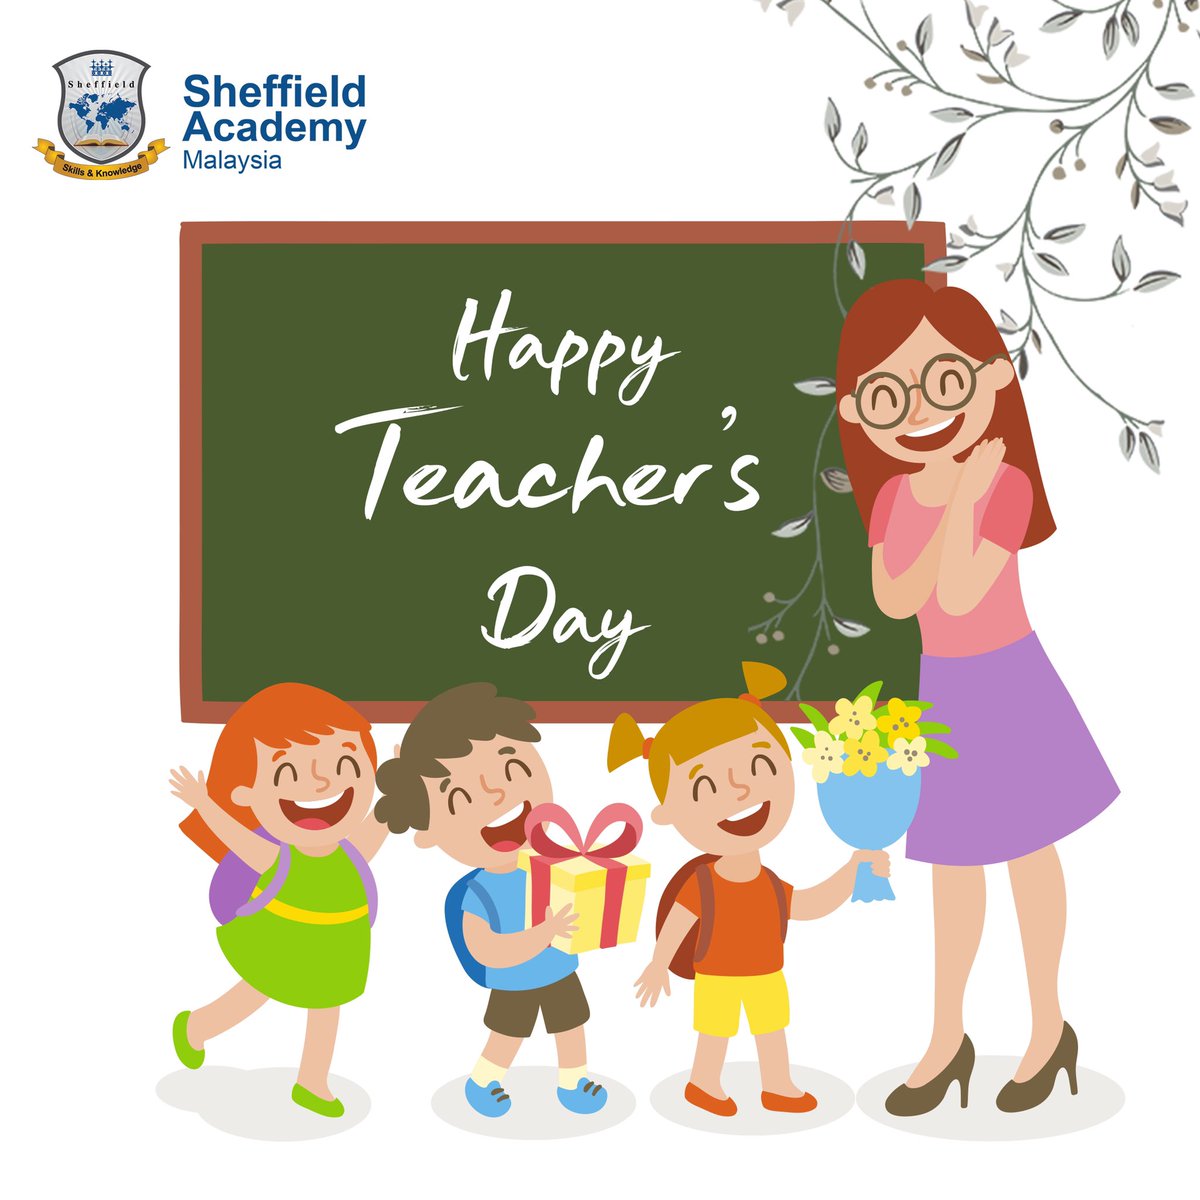 Sheffield Academy On Twitter Teachers Are Like Candles They Consume Themselves To Brighten The Lives Of Students On Behalf Of Everyone At Sheffield Academy We Wish You A Happy Teachers Day Sheffieldacademy